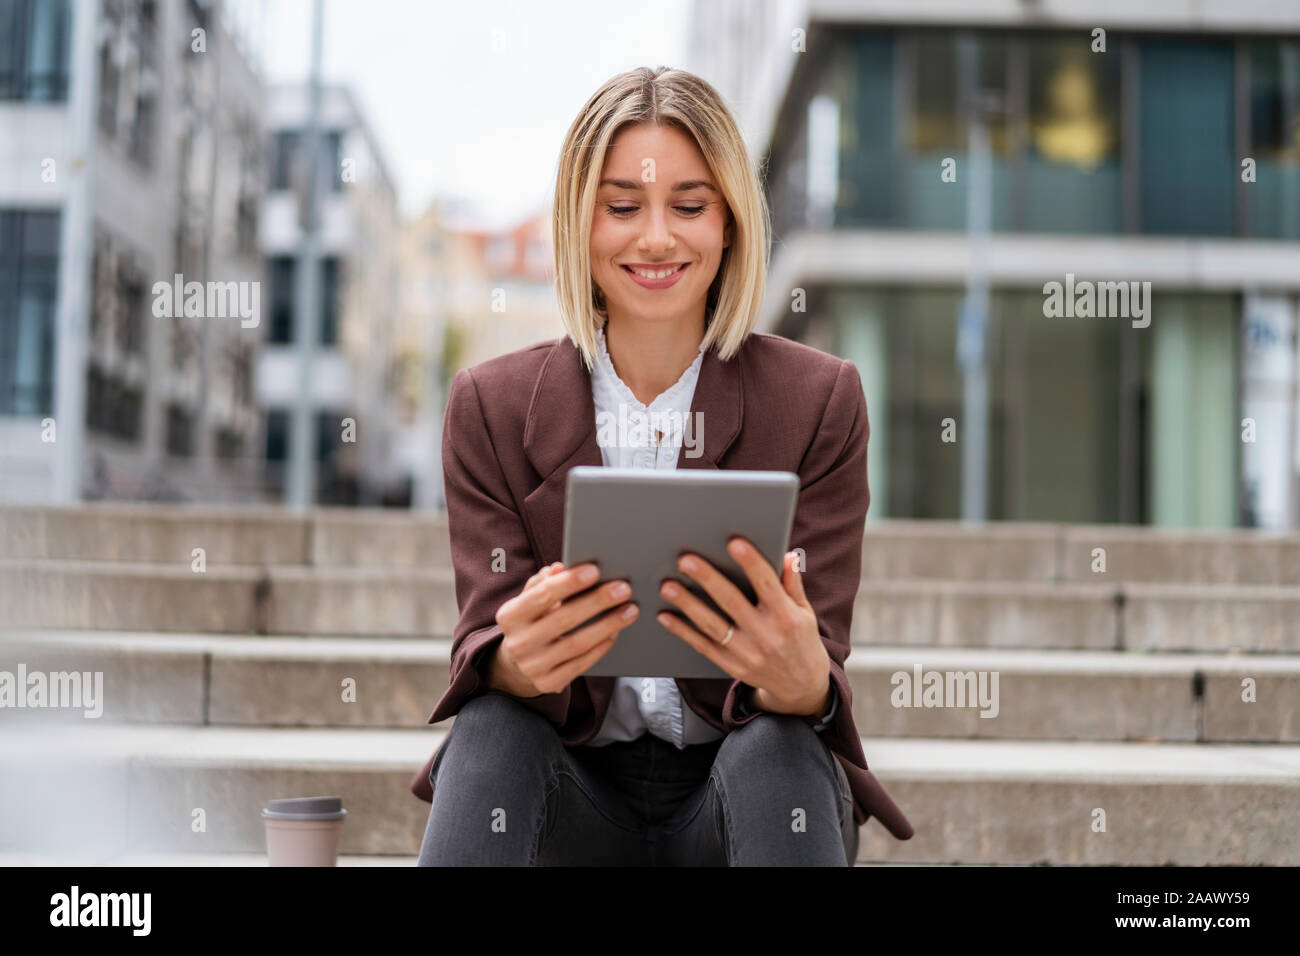 Smiling young businesswoman using tablet in the city Stock Photo